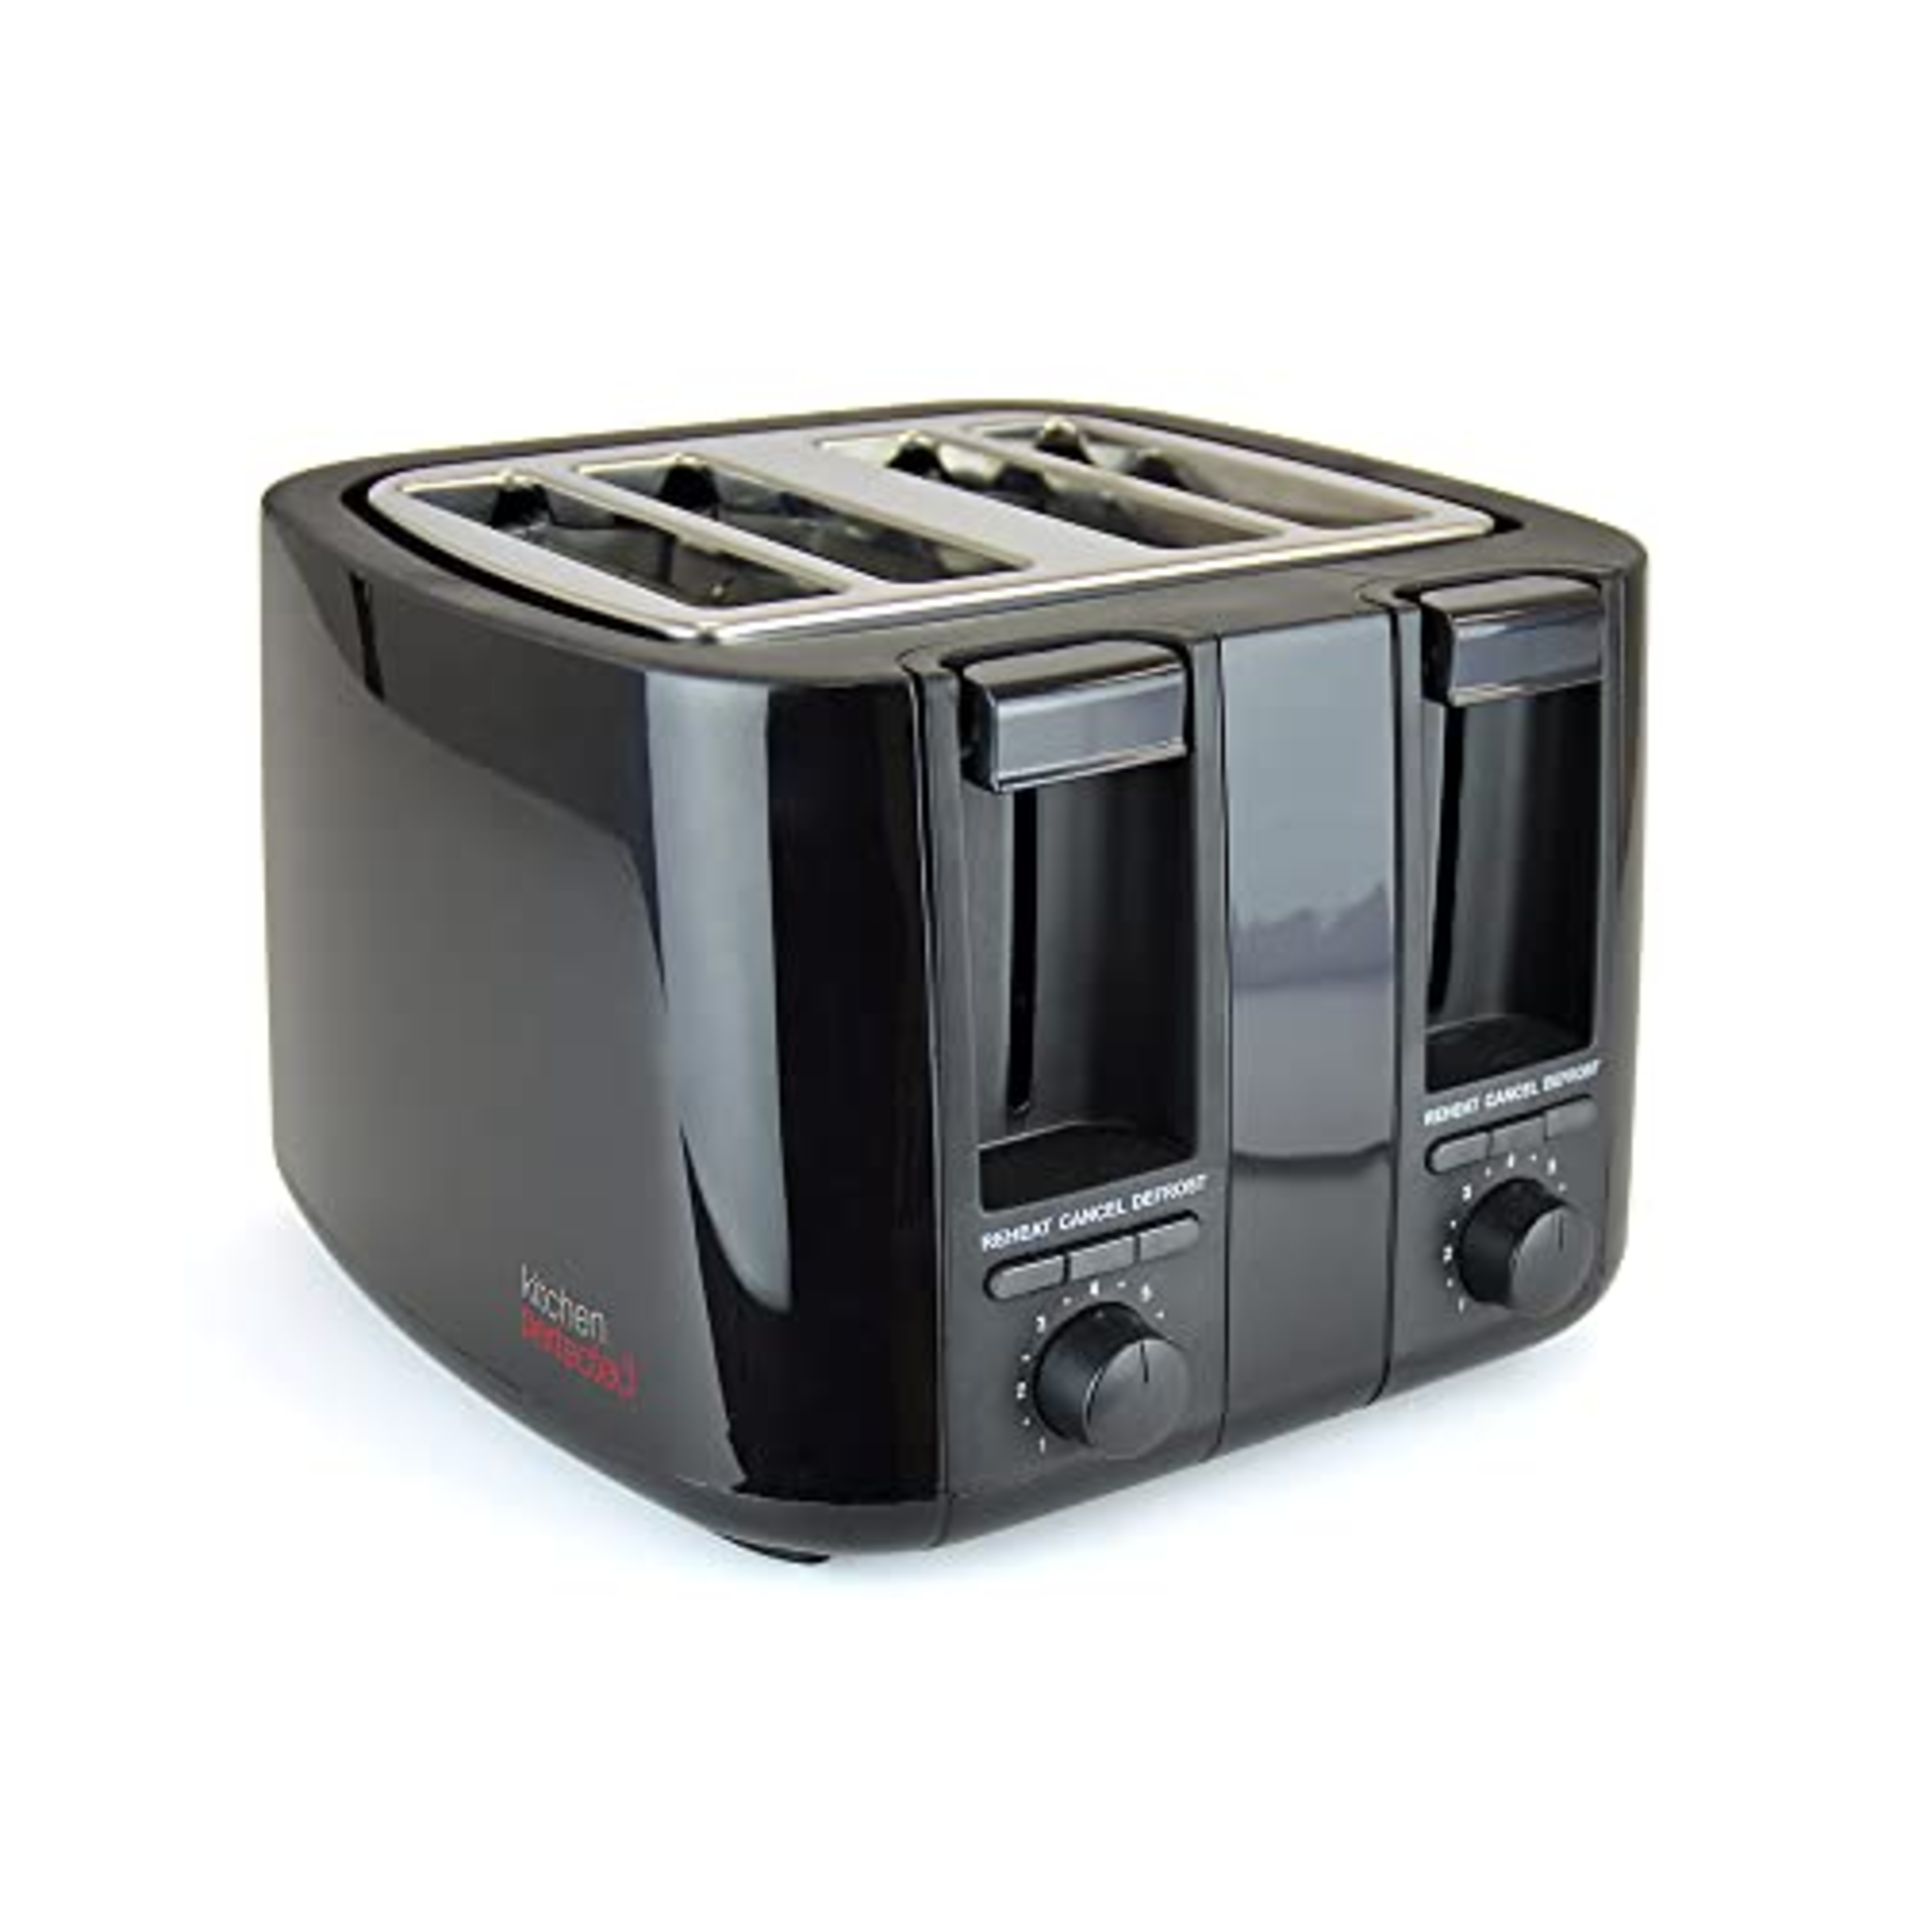 KitchenPerfected 4 Slice Wide Slot Toaster, 7 Browning Settings, Defrost/Reheat/Cancel